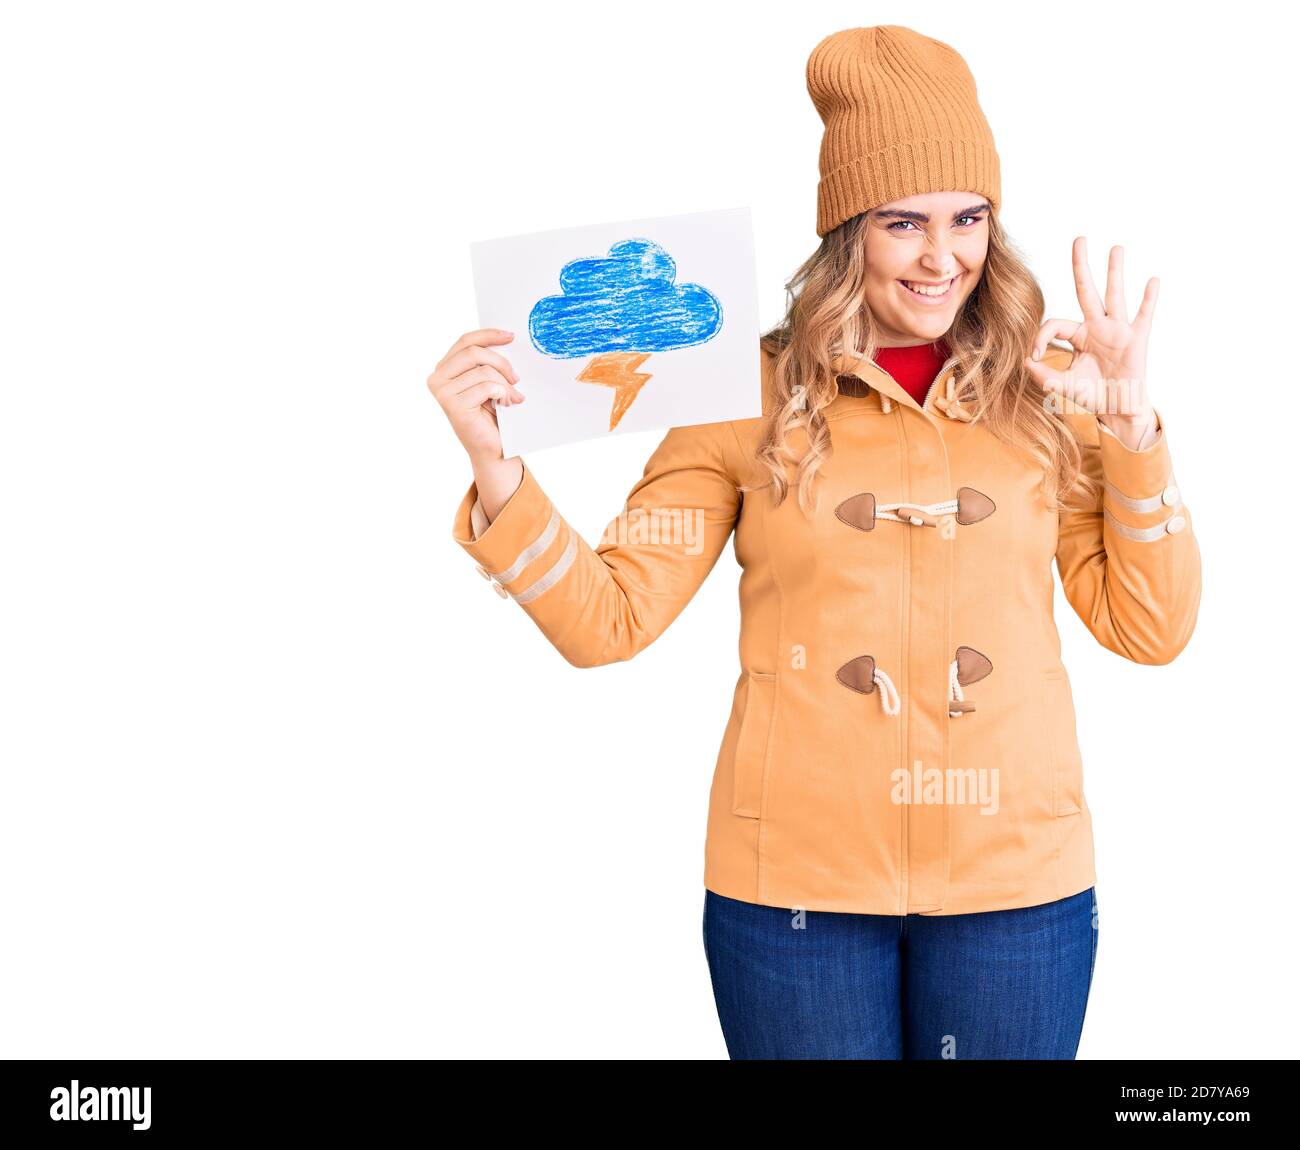 Young caucasian woman holding thunder draw doing ok sign with fingers, smiling friendly gesturing excellent symbol Stock Photo